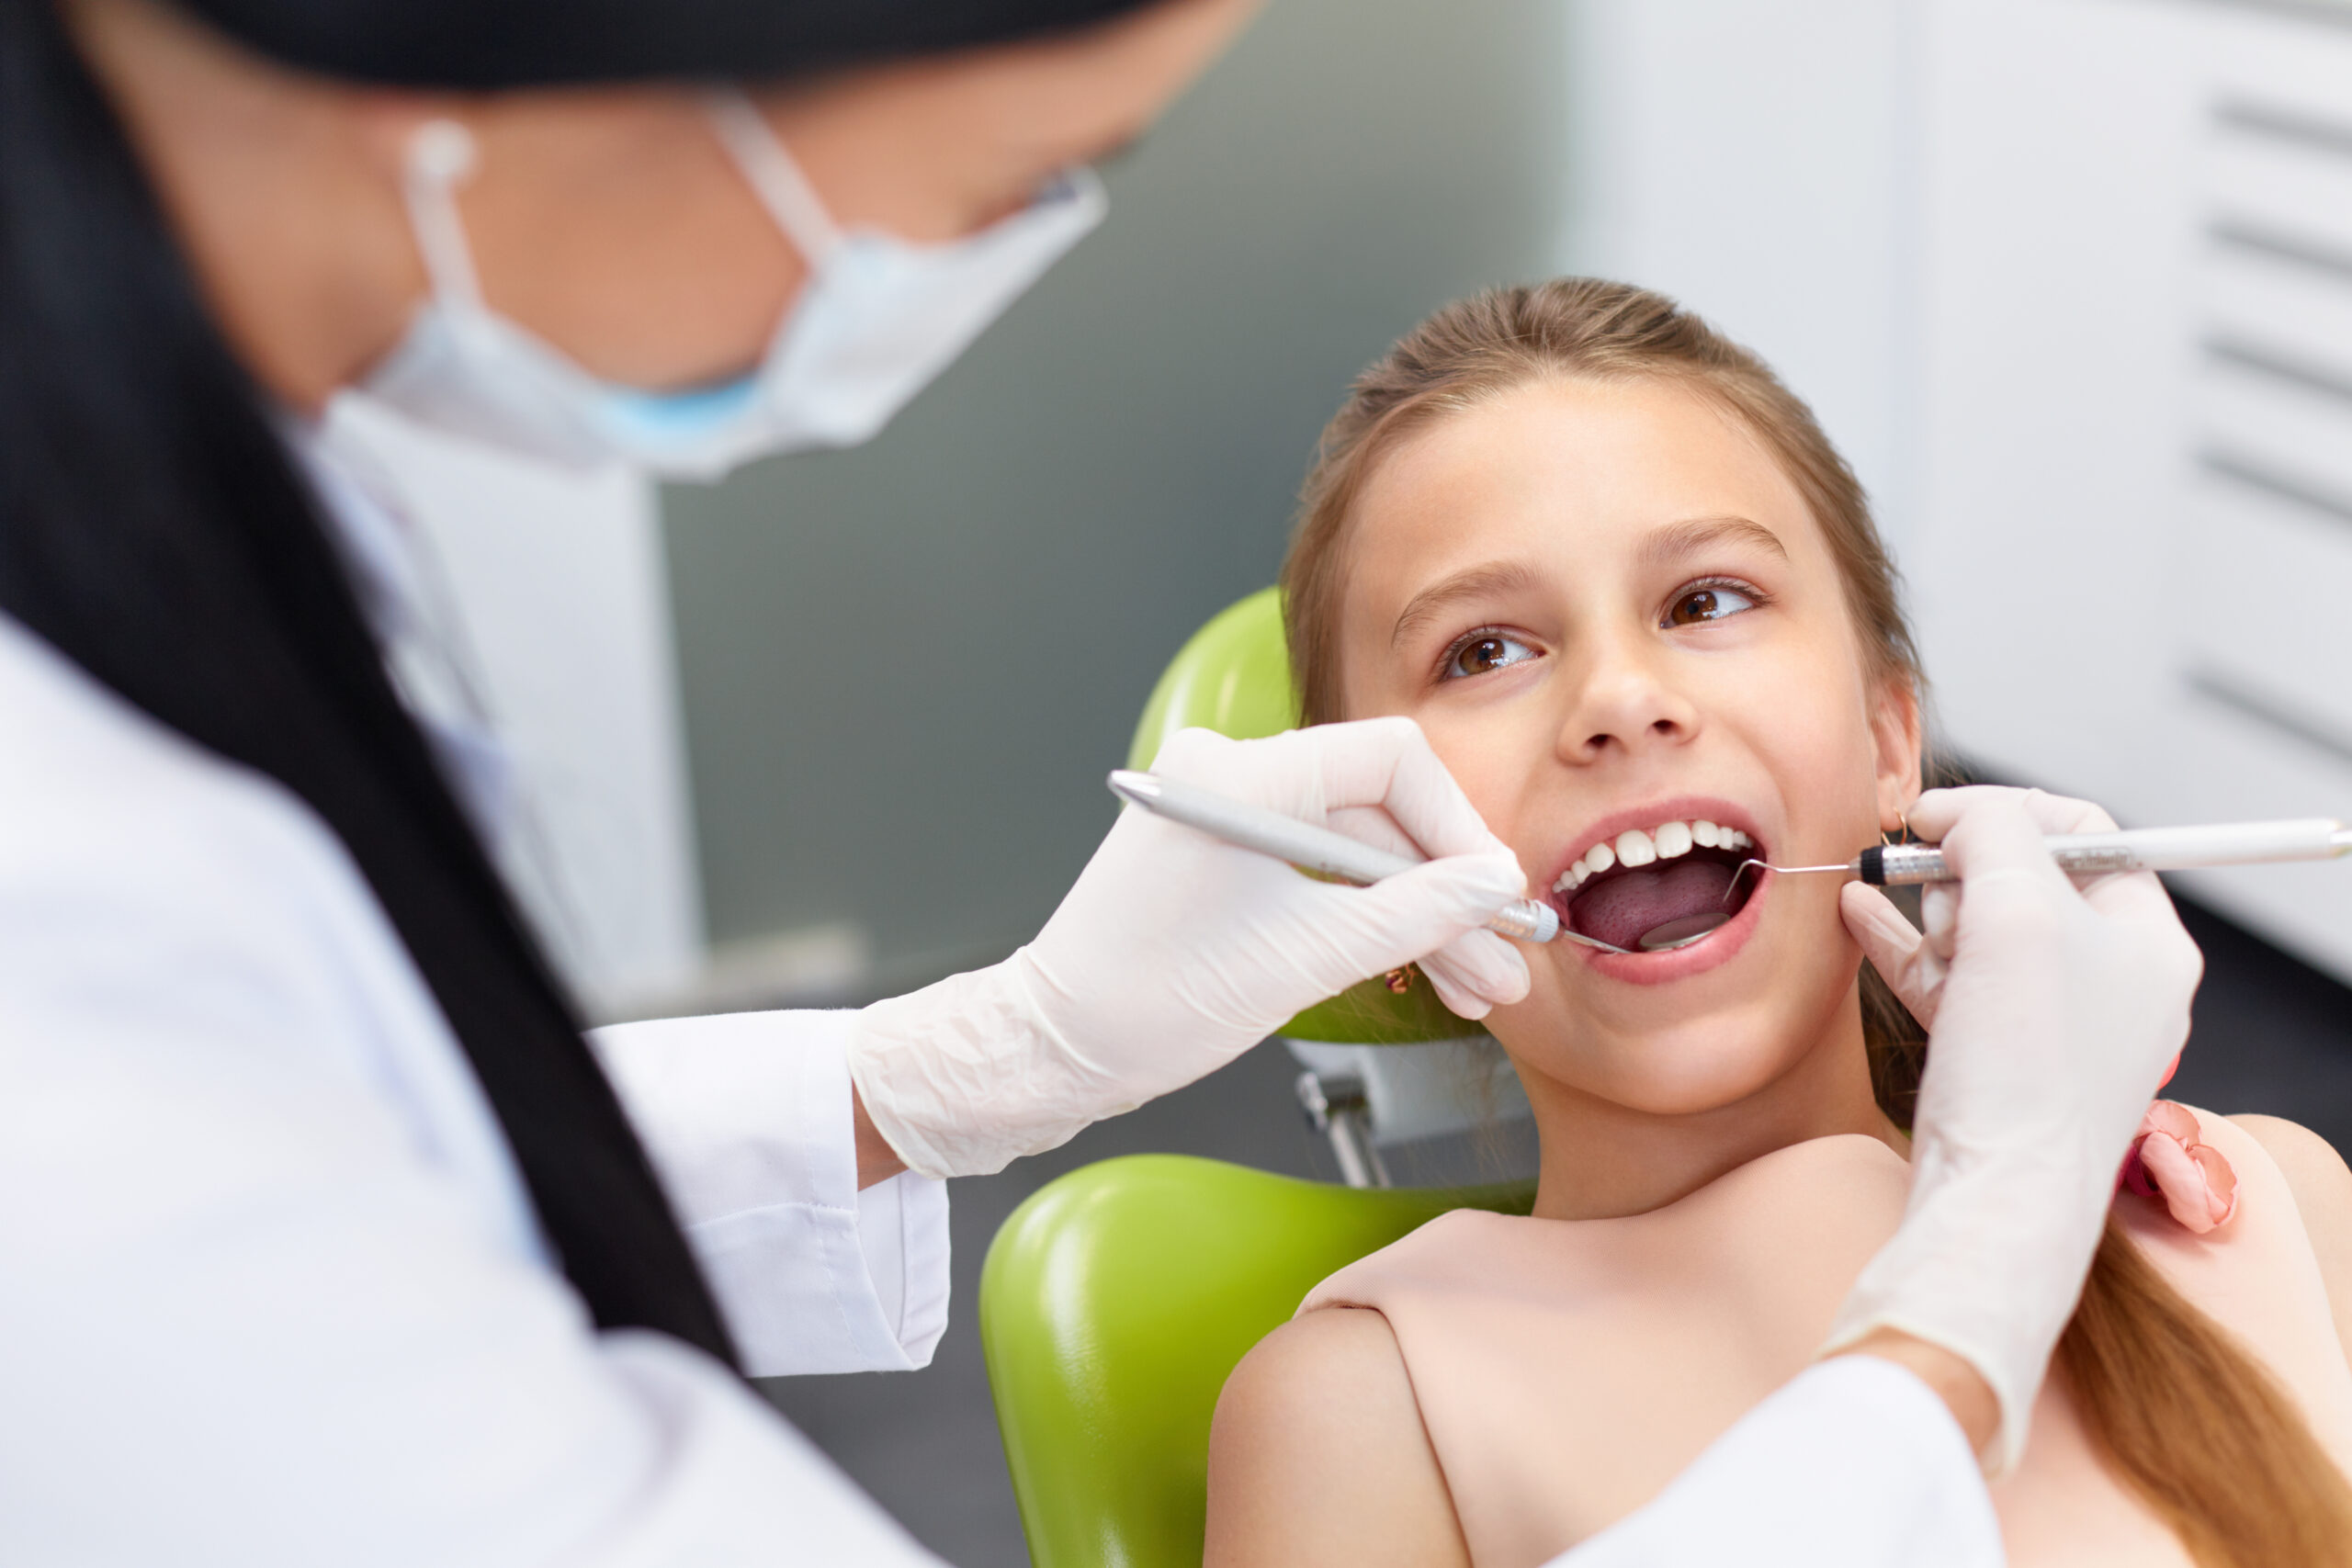 3 Top Problems Children Face In Dentistry And How To Solve Them